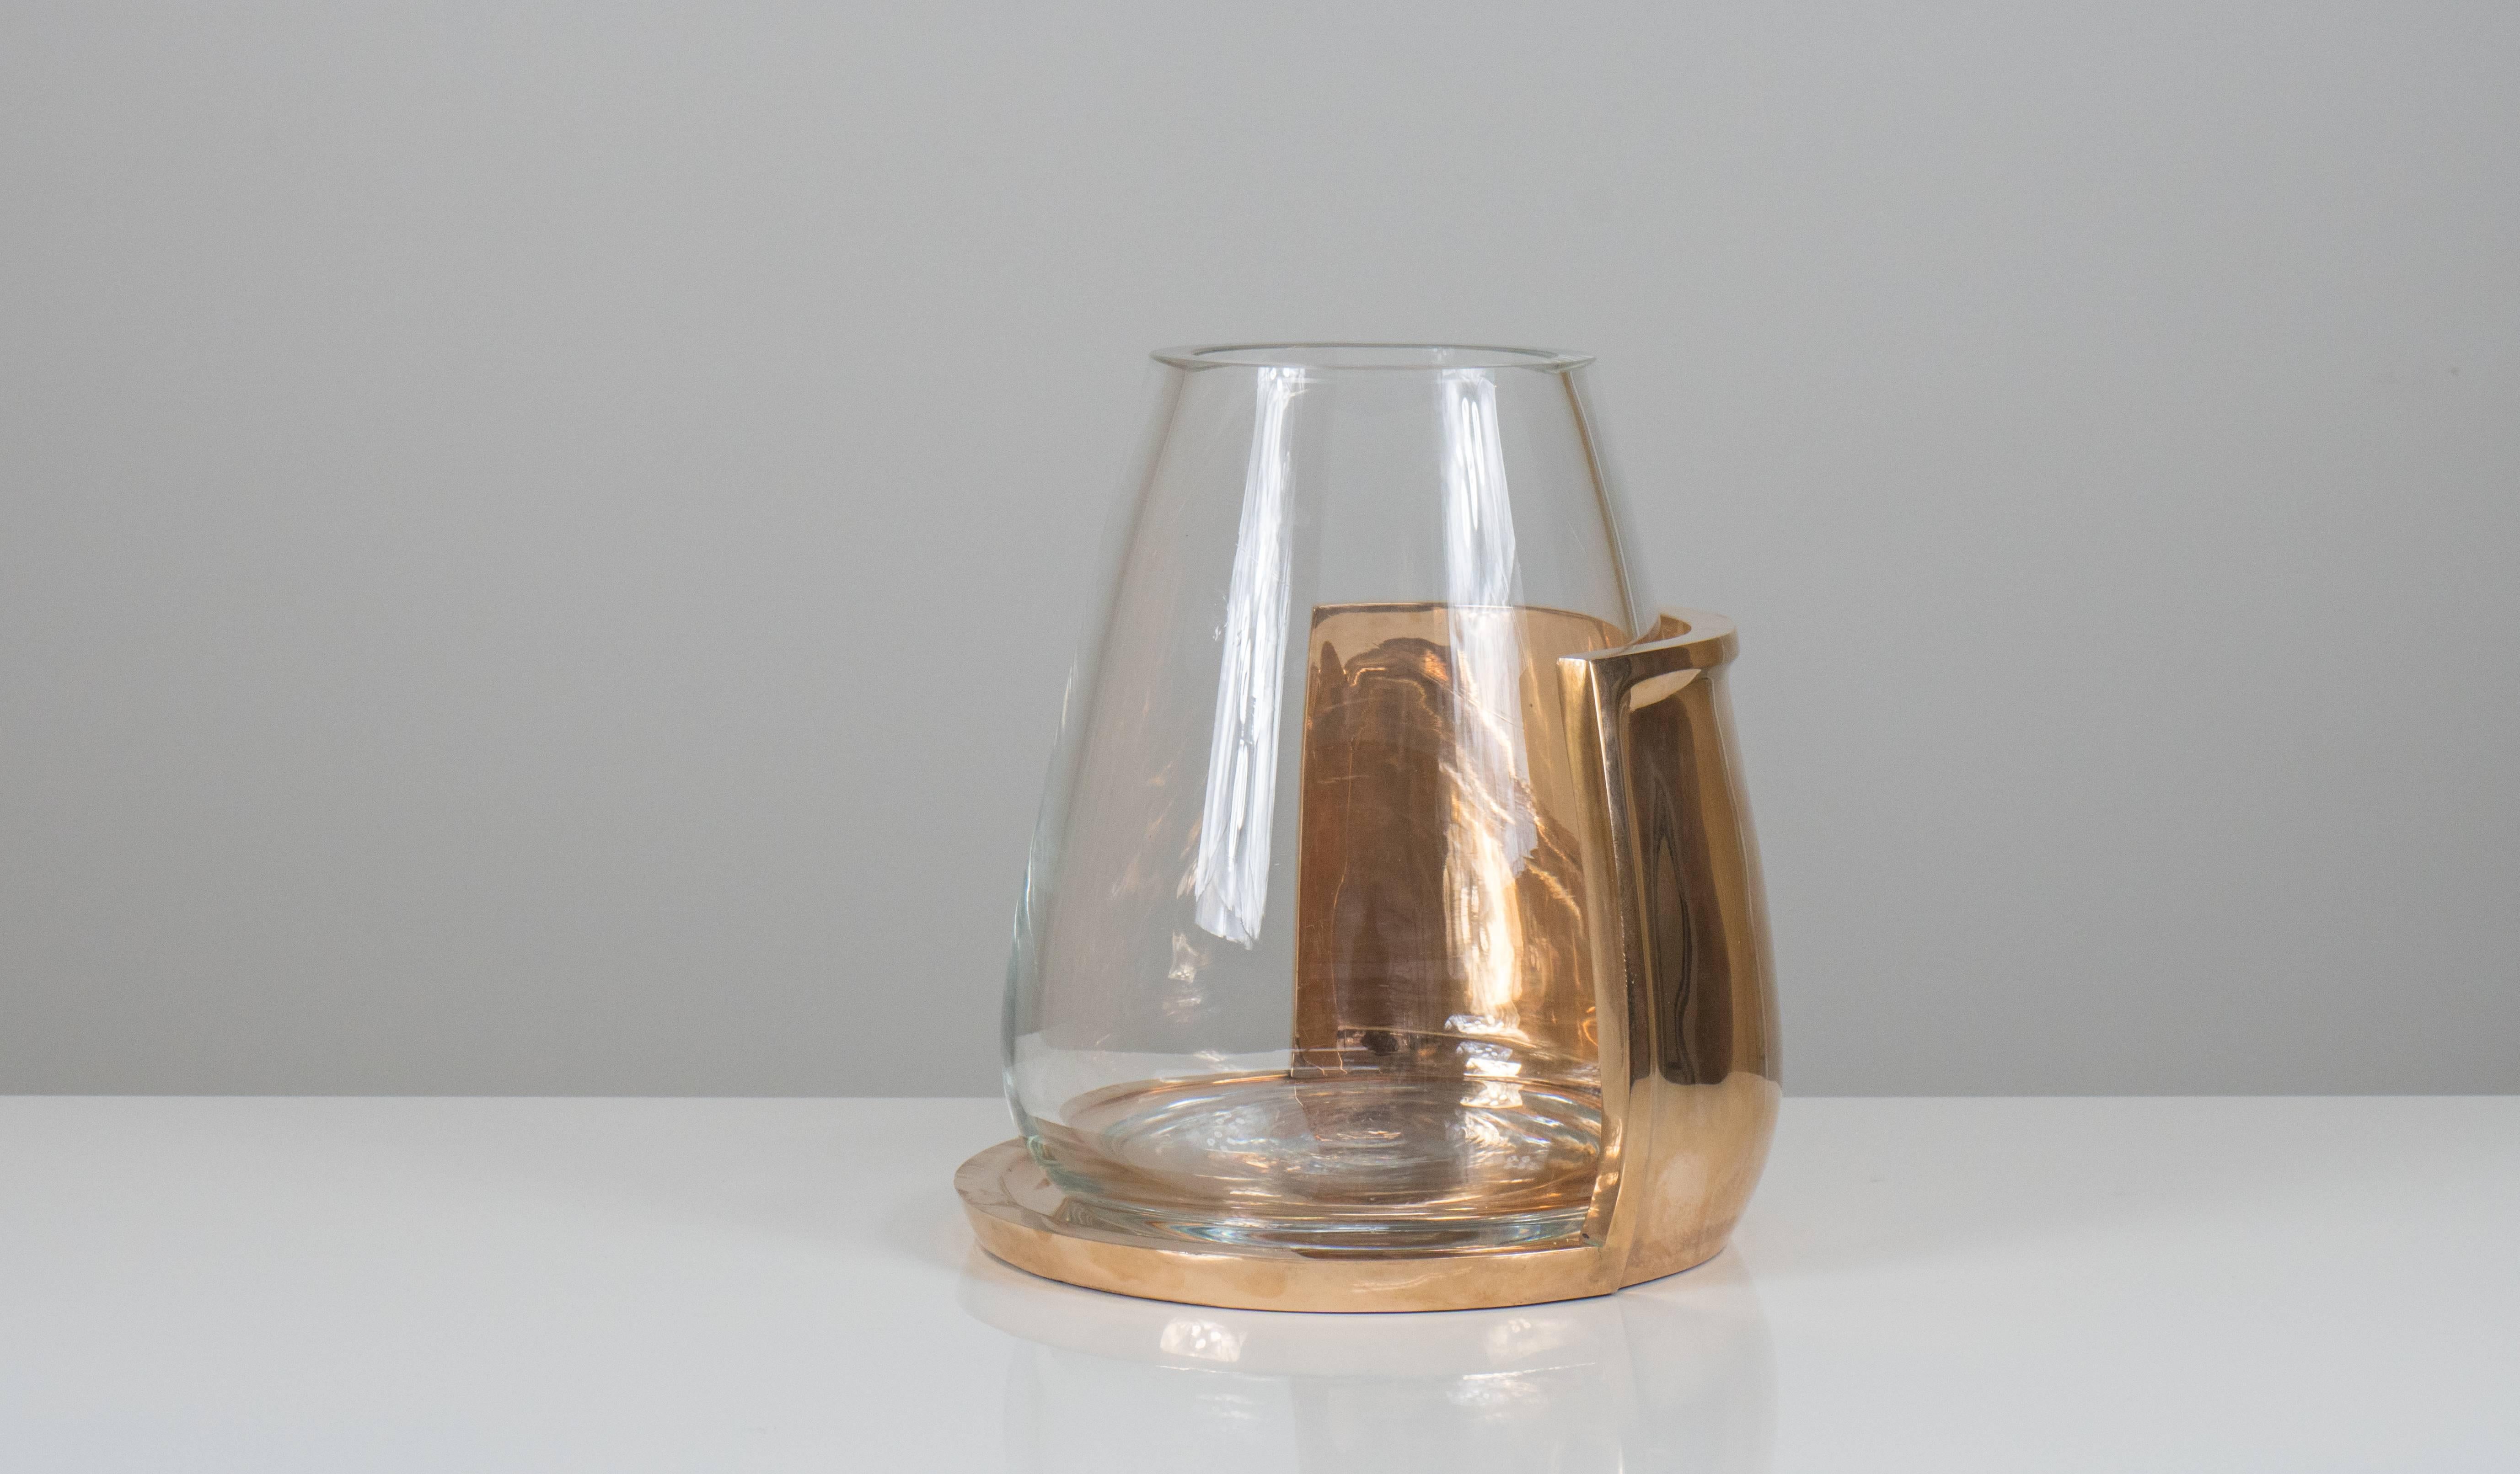 Vase or candleholder or hurricane in polished bronze with handblown glass insert by contemporary French designer Eric Schmitt.